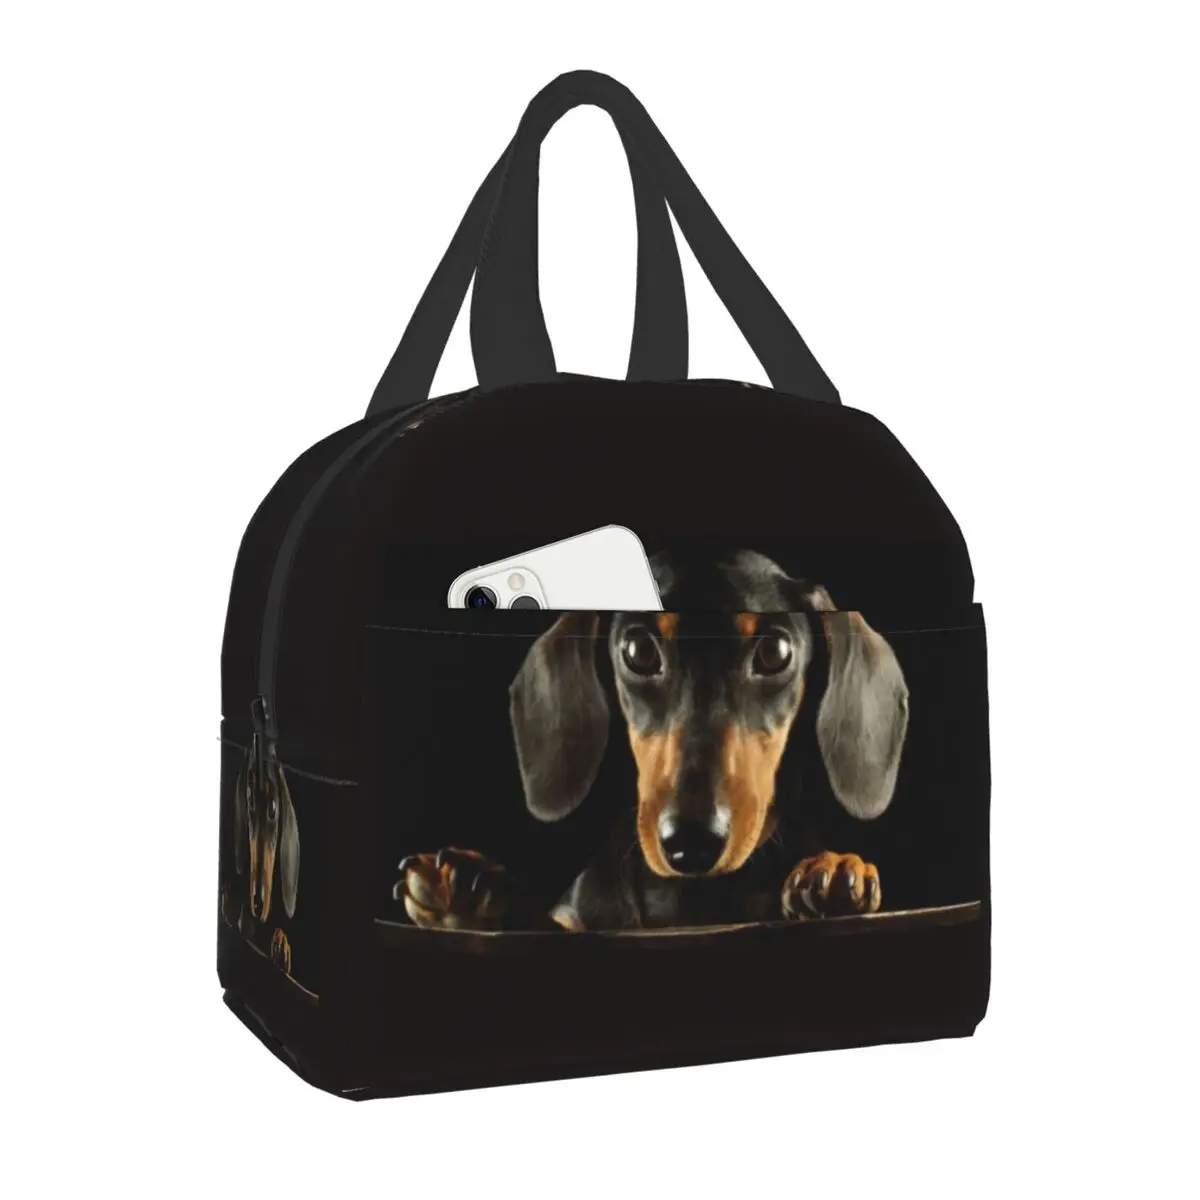 

Dachshund Insulated Lunch Tote Bag Portable Thermal Cooler Food Bento Box for Work School Travel Sausage Wiener Dog Lunch Bags